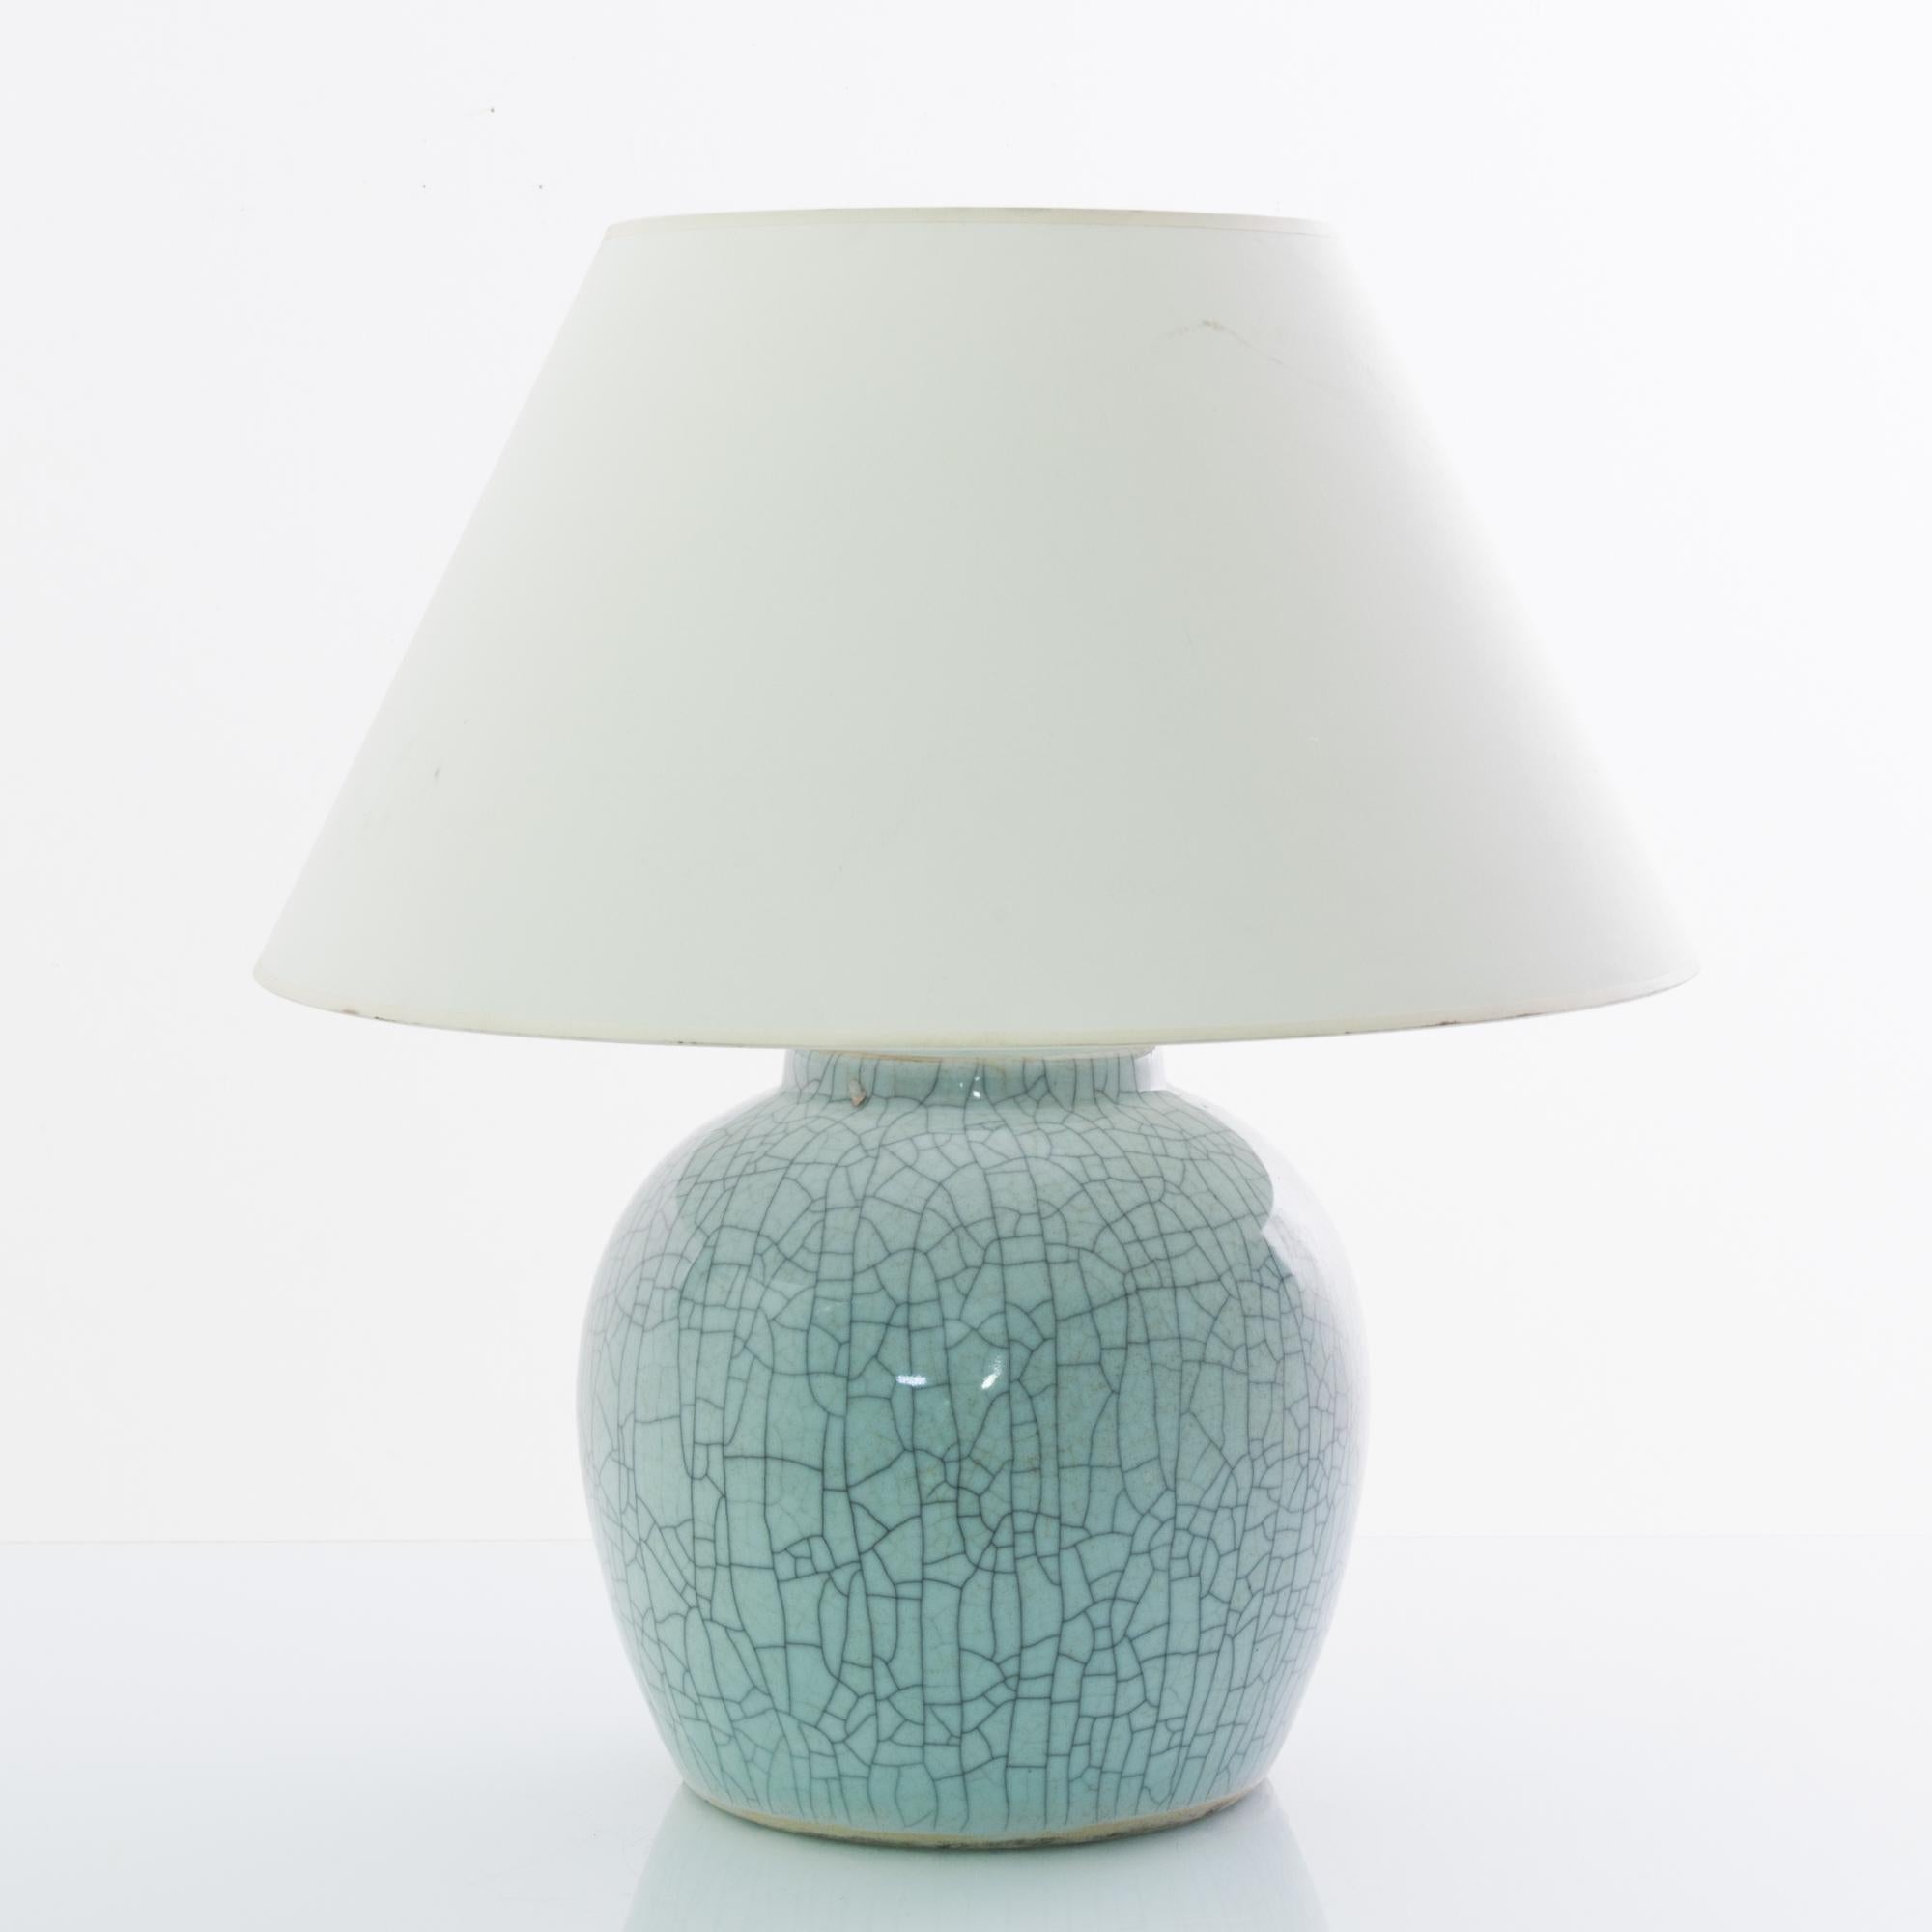 A vintage Chinese vase, fitted with an adjustable brass fixture and E26 lighting socket. The lustrous celadon green glaze is laced with a graphic crackle pattern creating a vivid visual impact. Textured glazes, attractive colors and organic shape